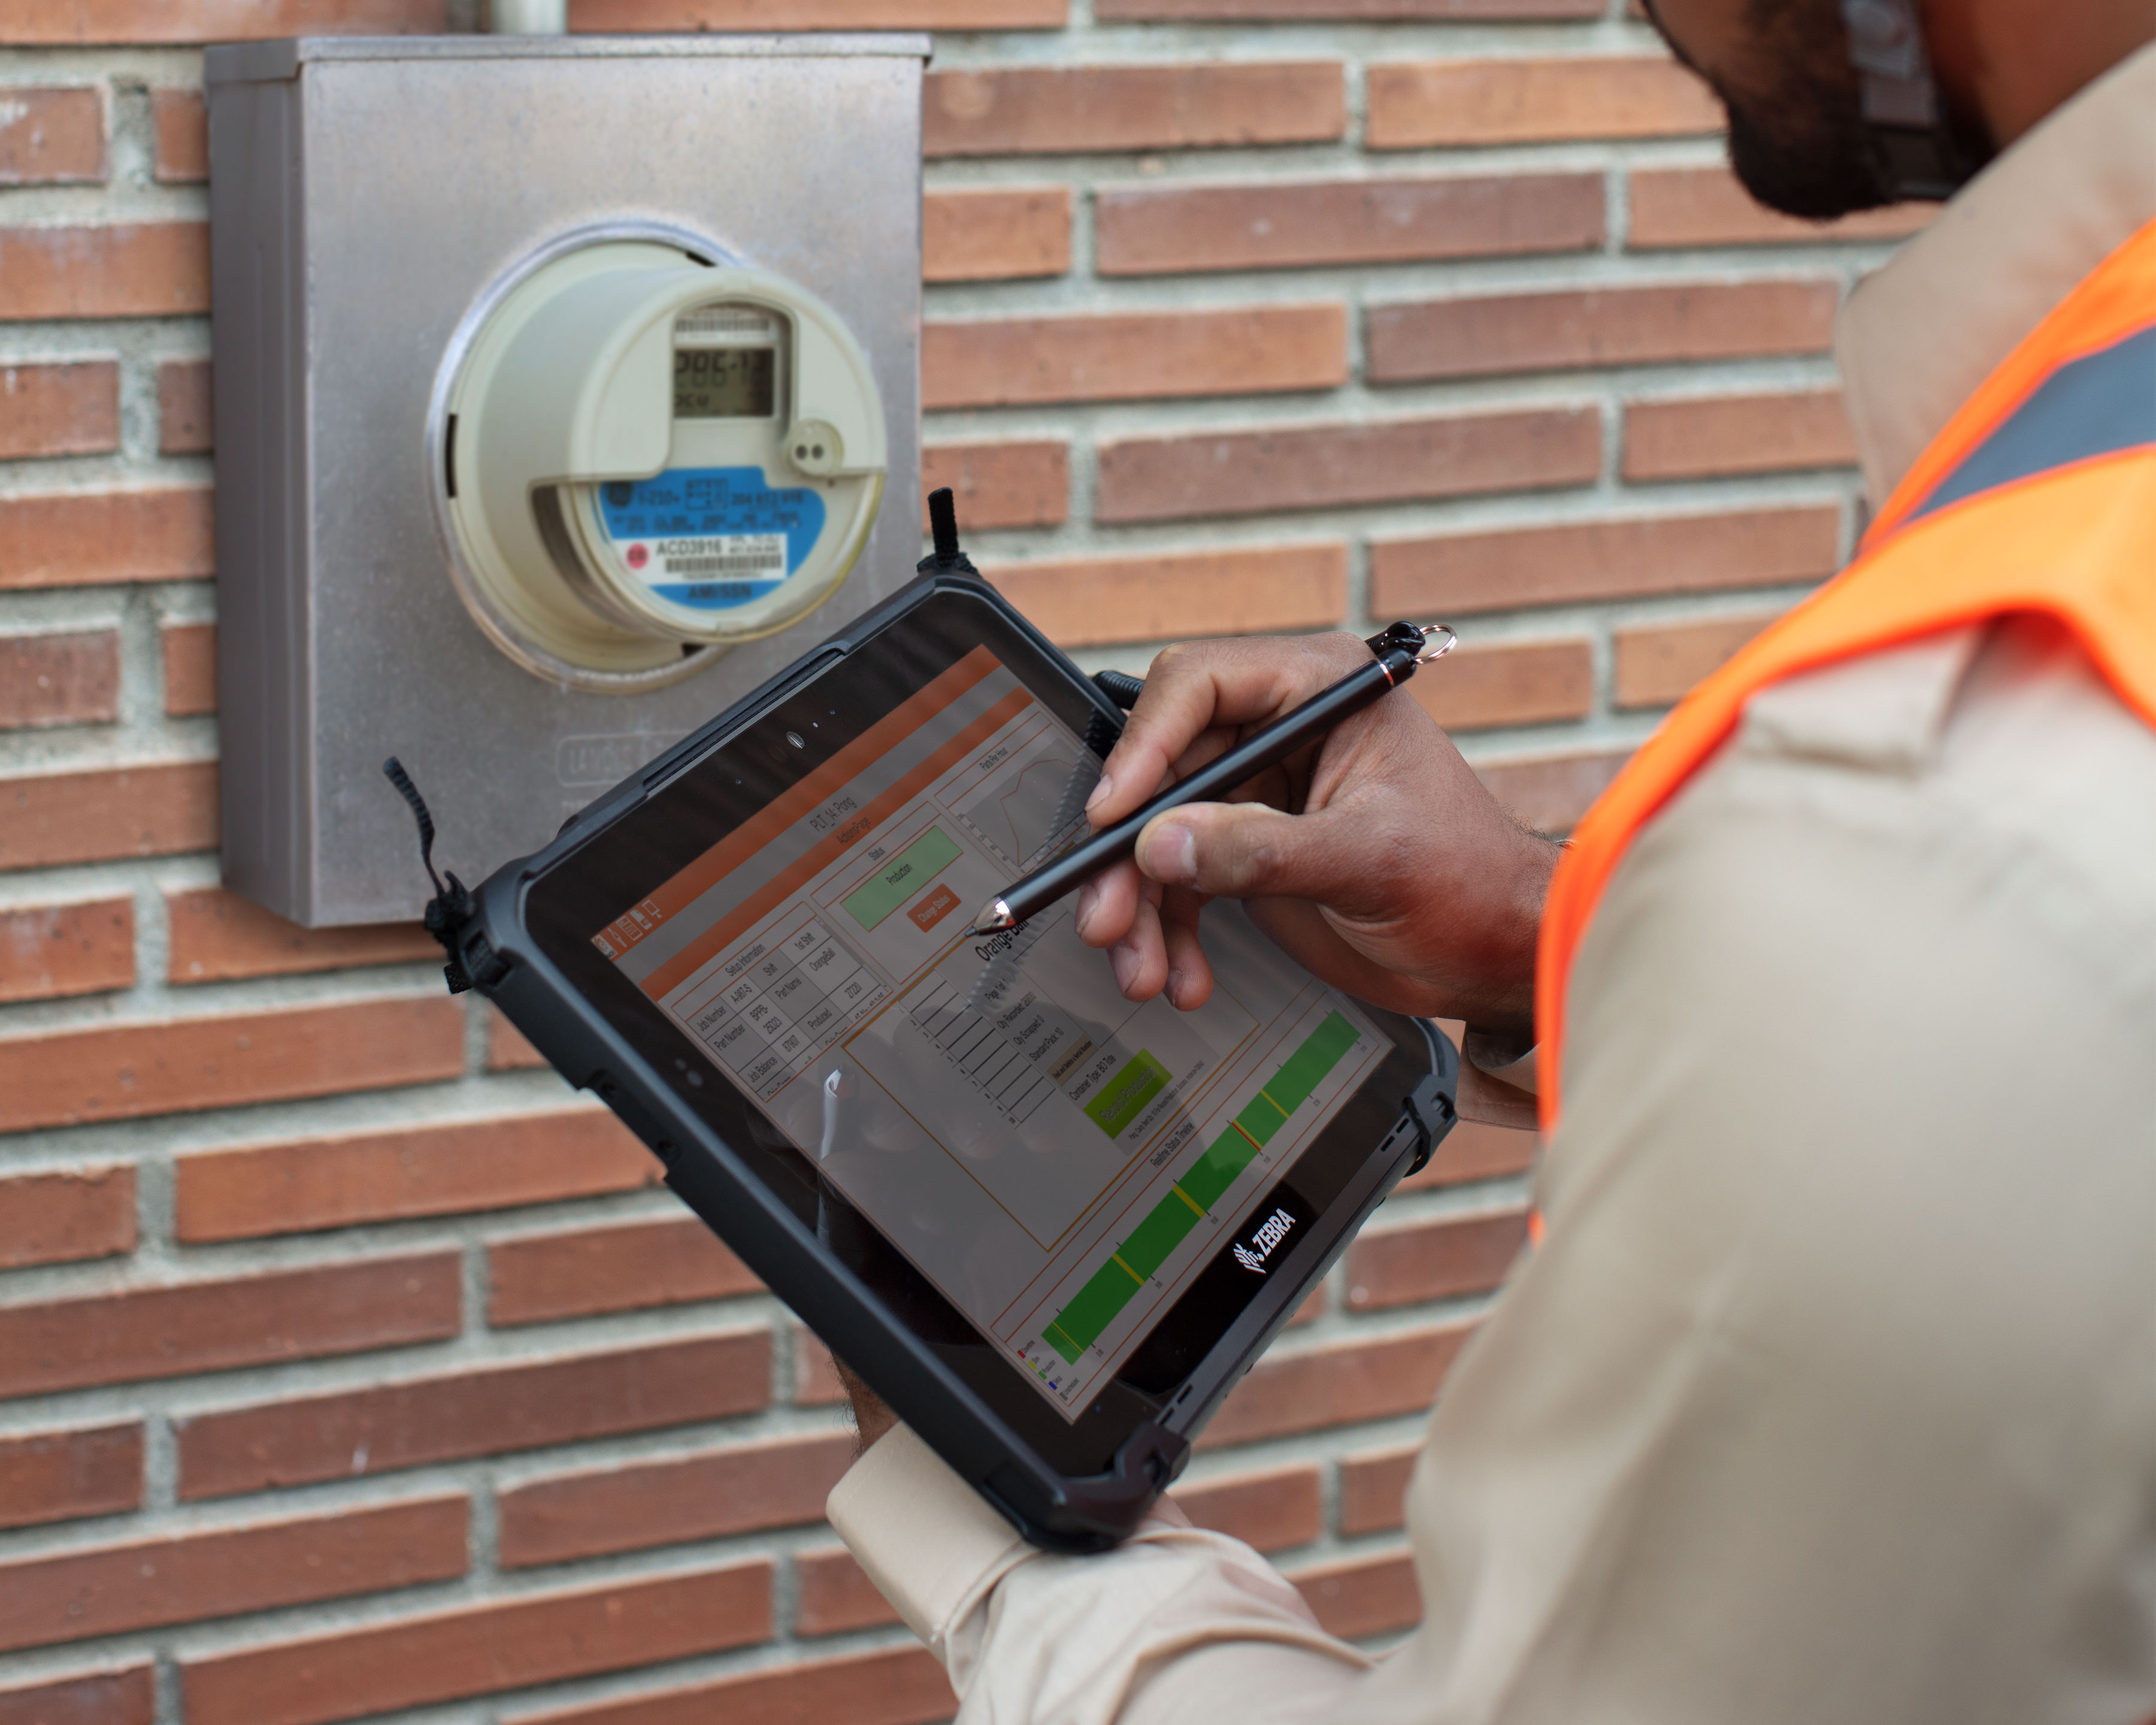 Professional meter reader uses Zebra ET8x Windows tablet to read and record a gas meter